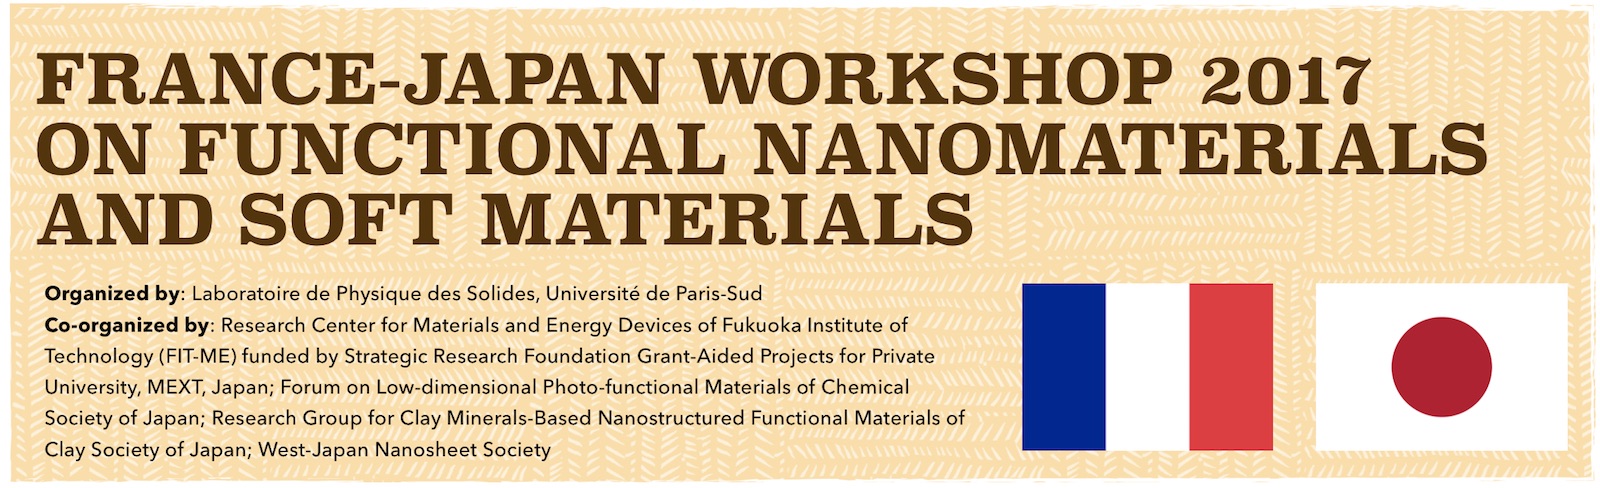 France-Japan Workshop 2017
on Functional Nano-materials and SOFT Materials